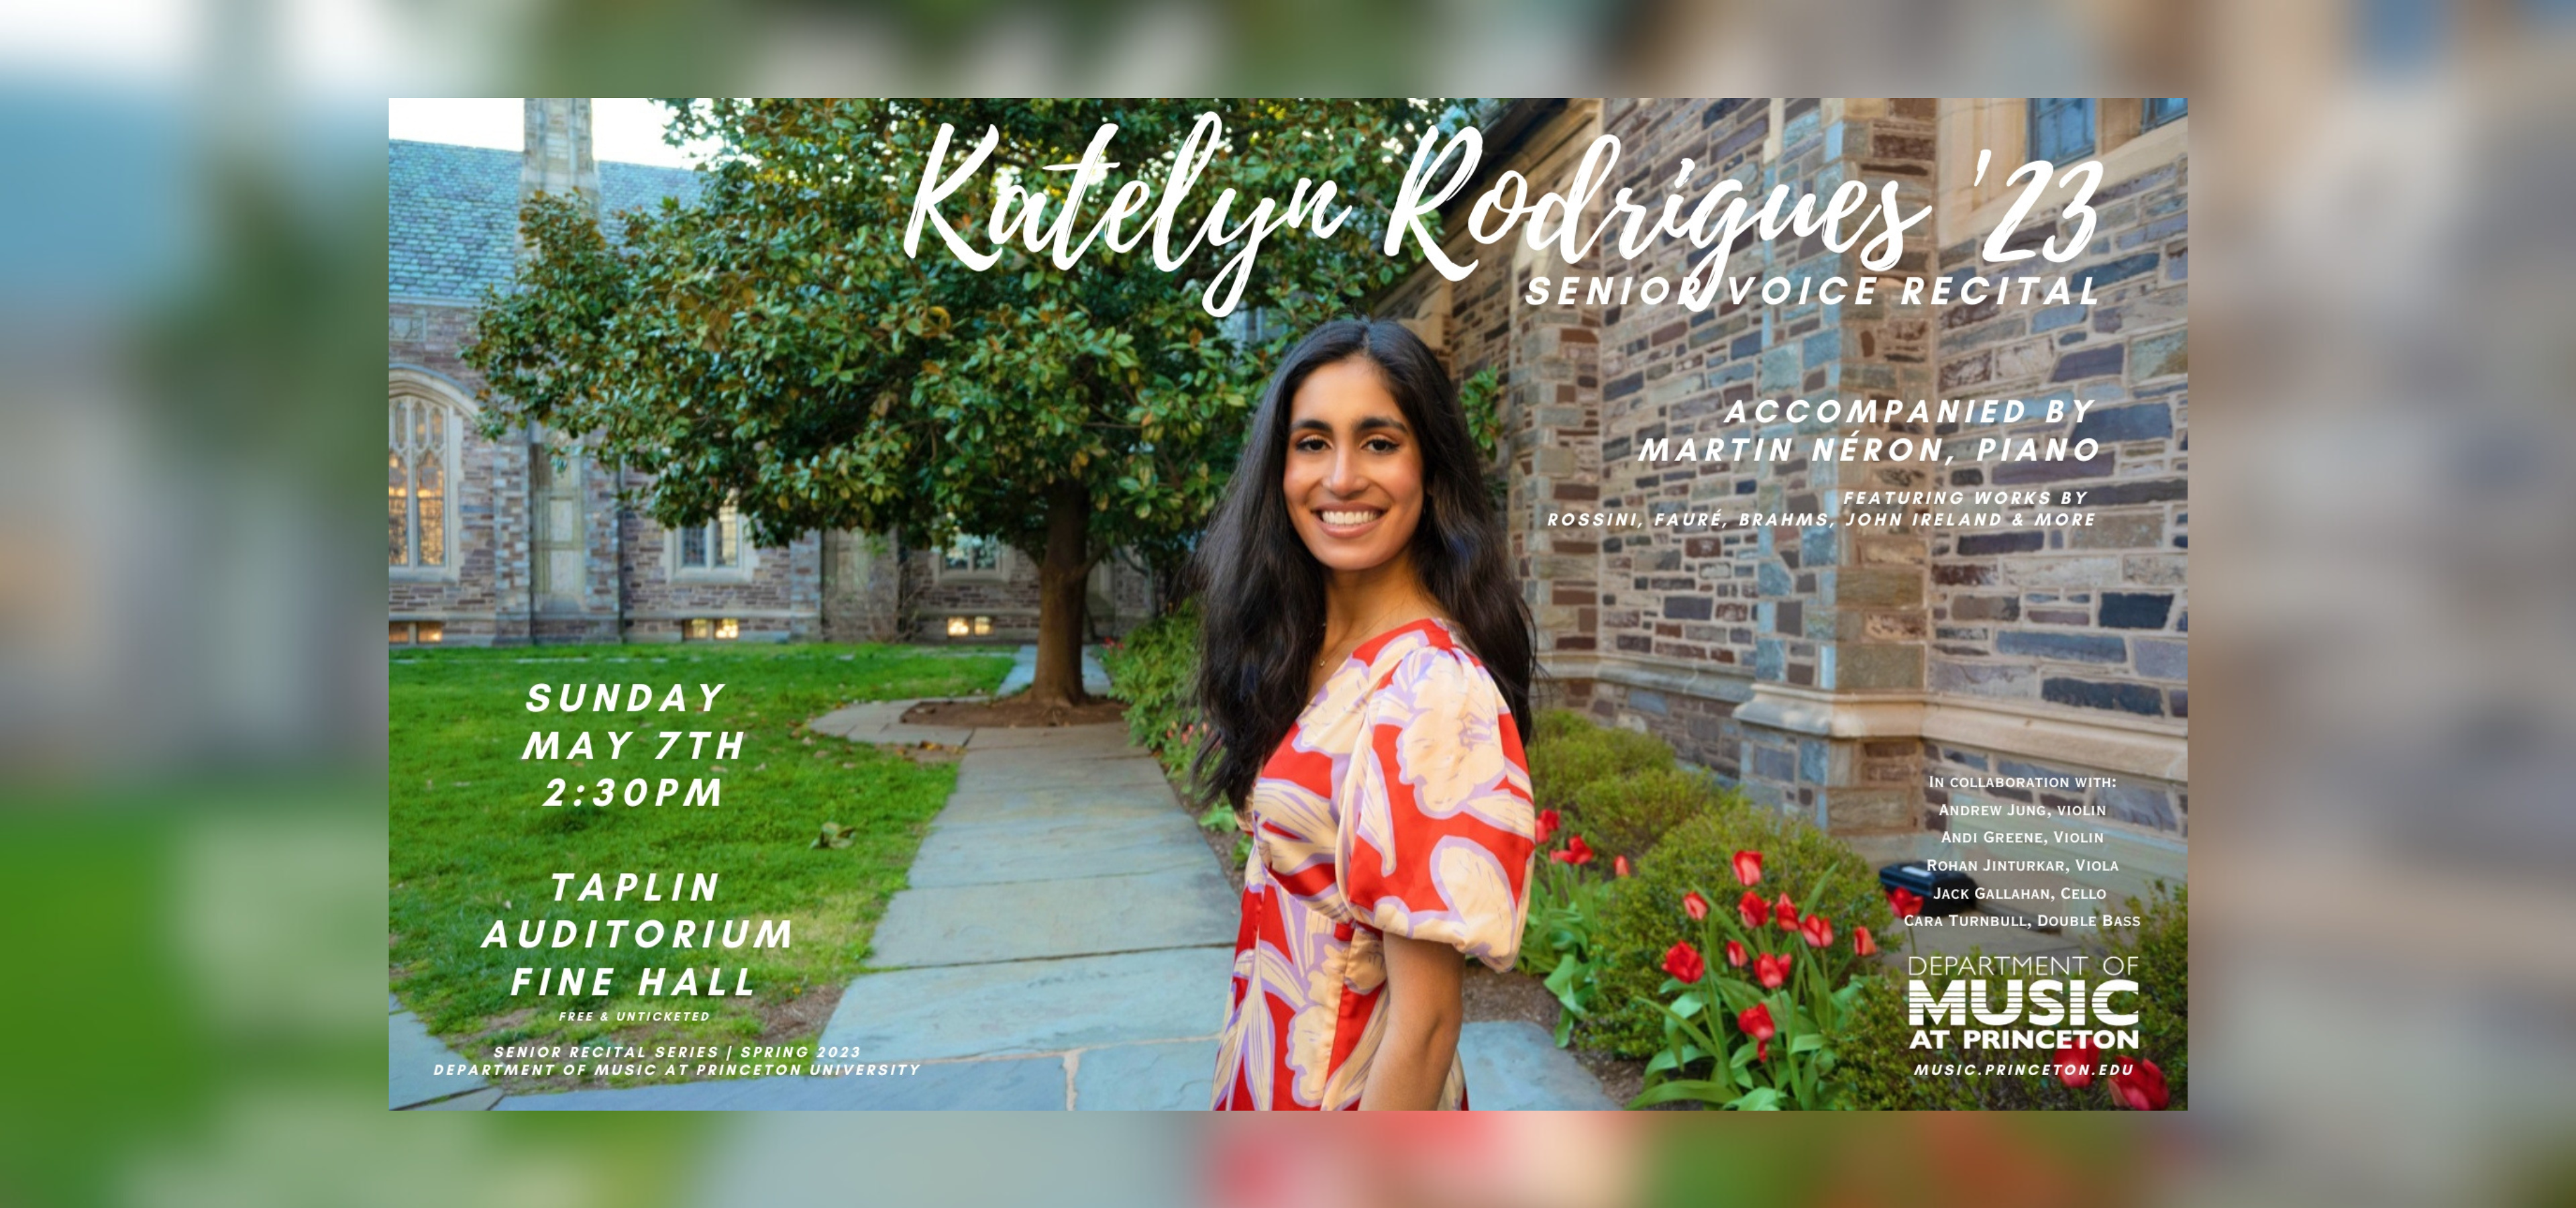 poster of Katelyn Rodrigues's senior voice recital with an image of Katelyn standing in front of a Princeton building and trees and flowers.